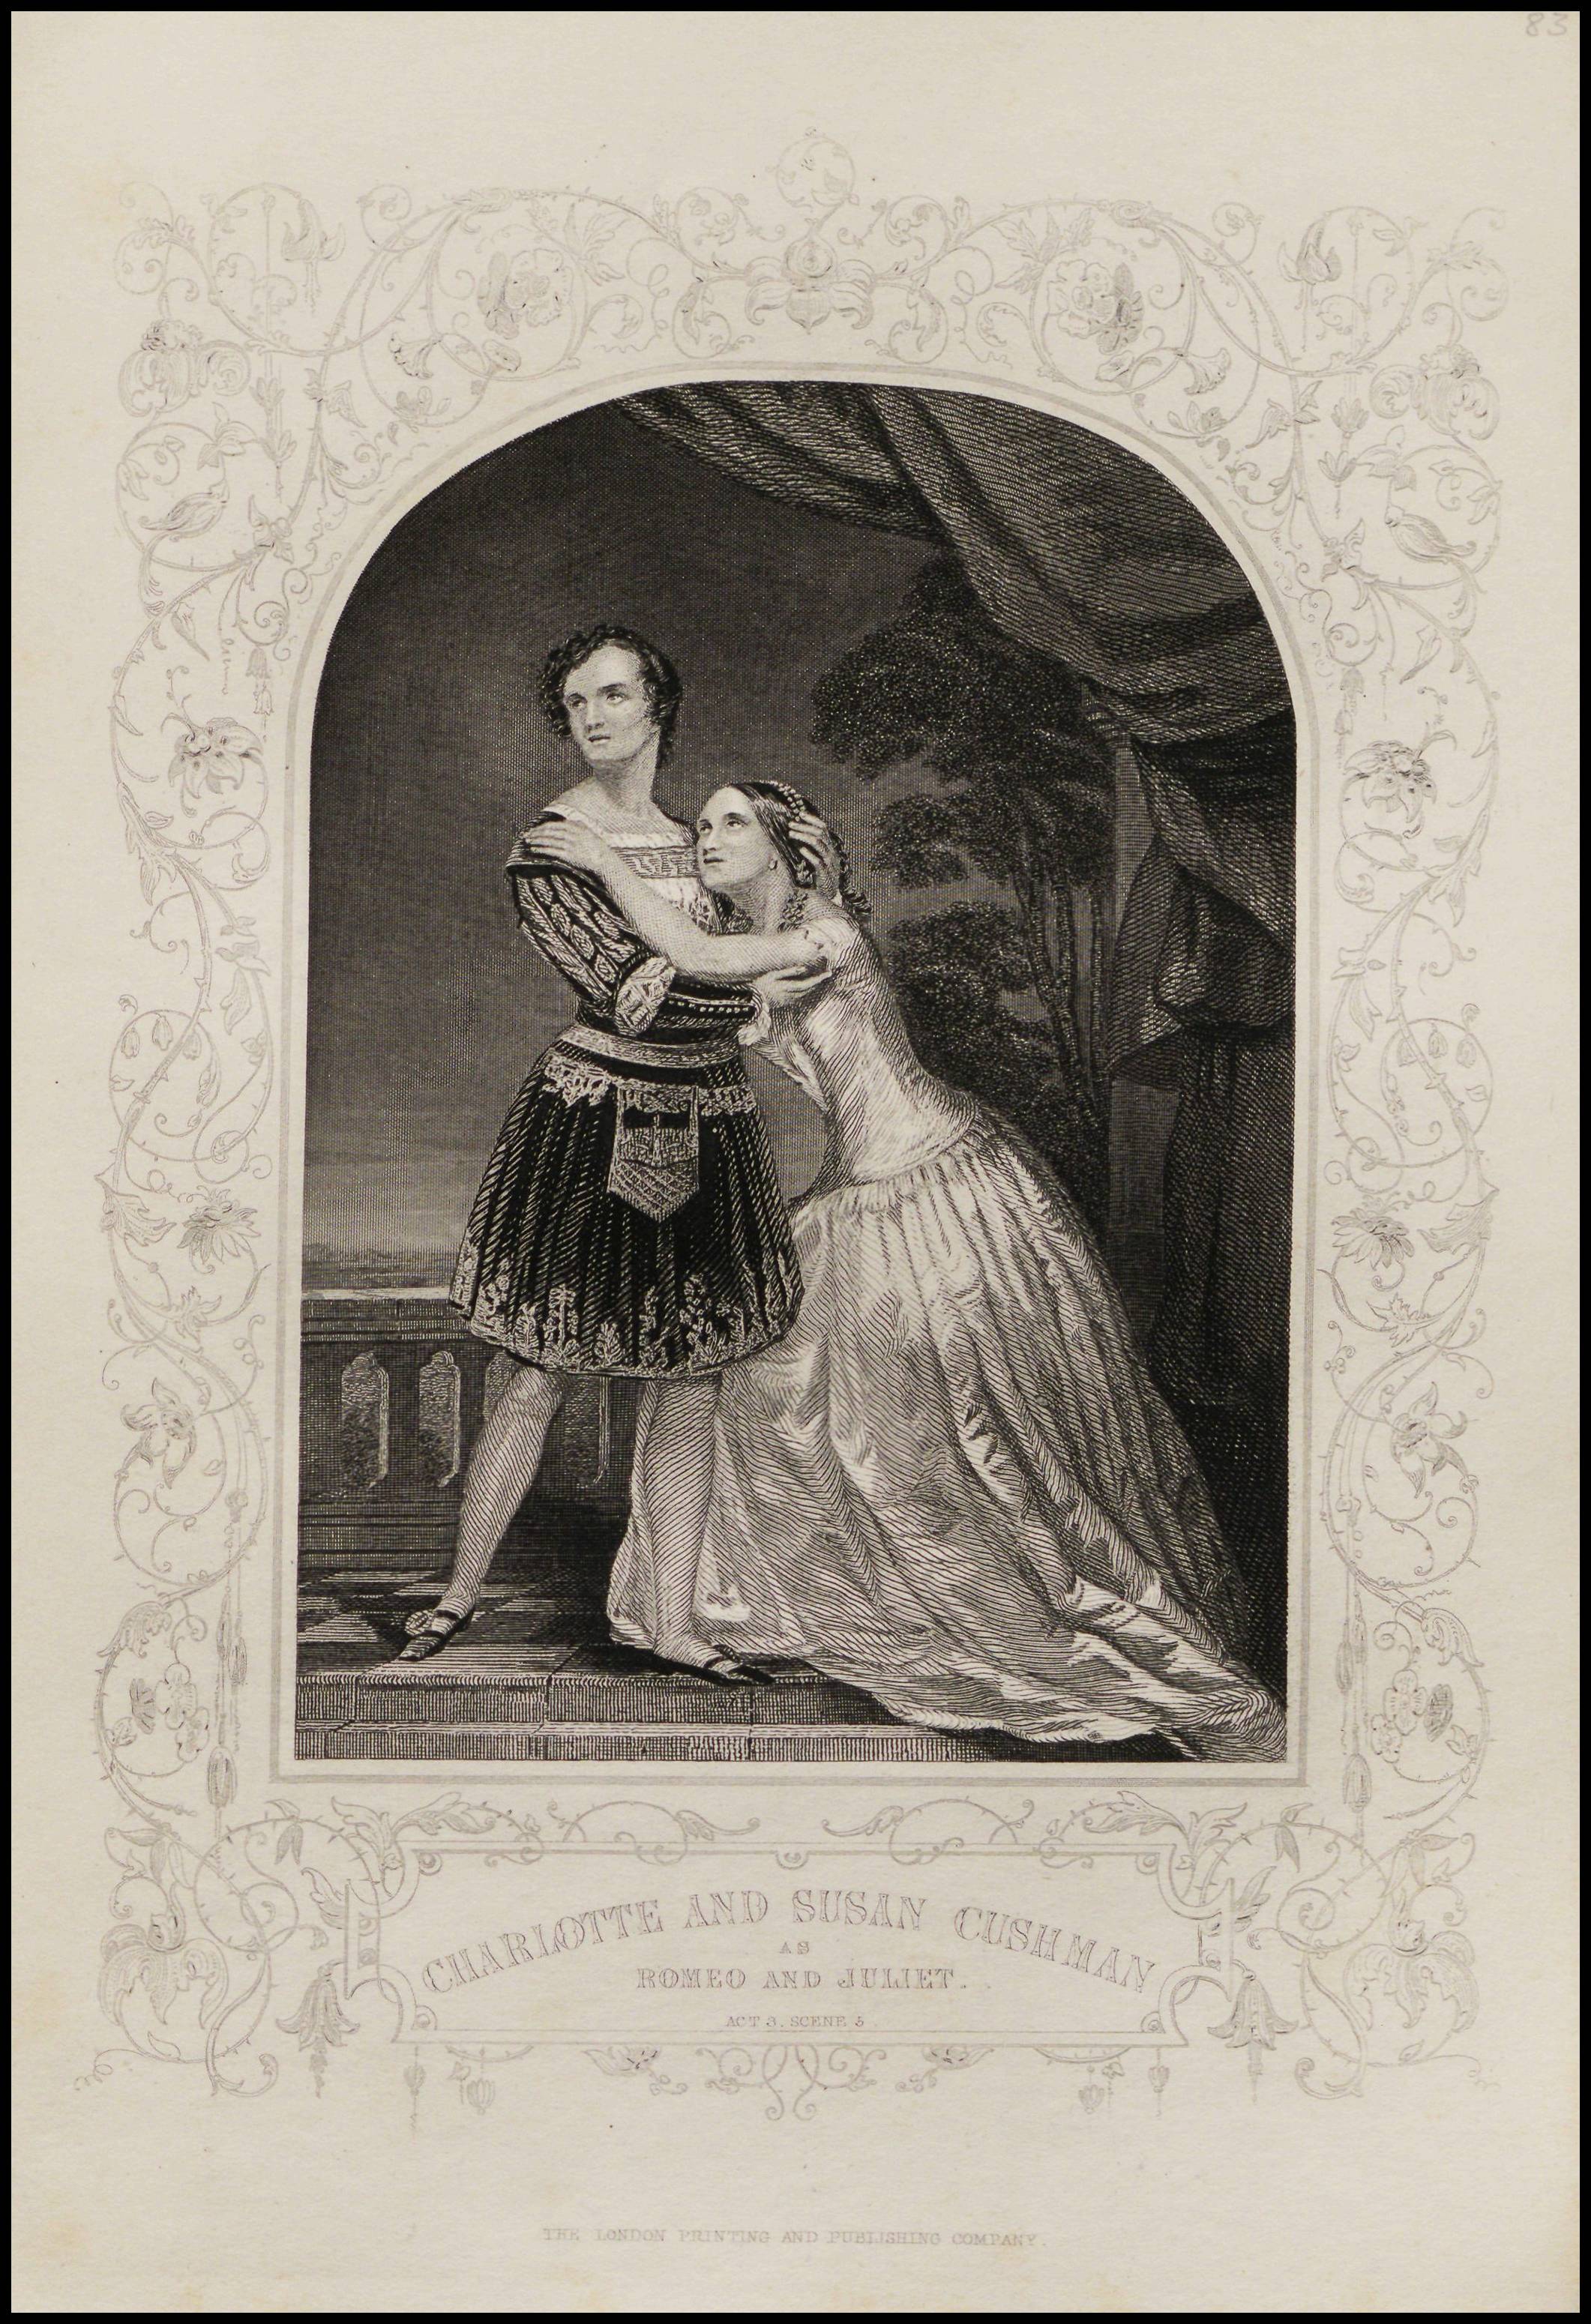 Charlotte and Susan Cushman as Romeo and Juliet